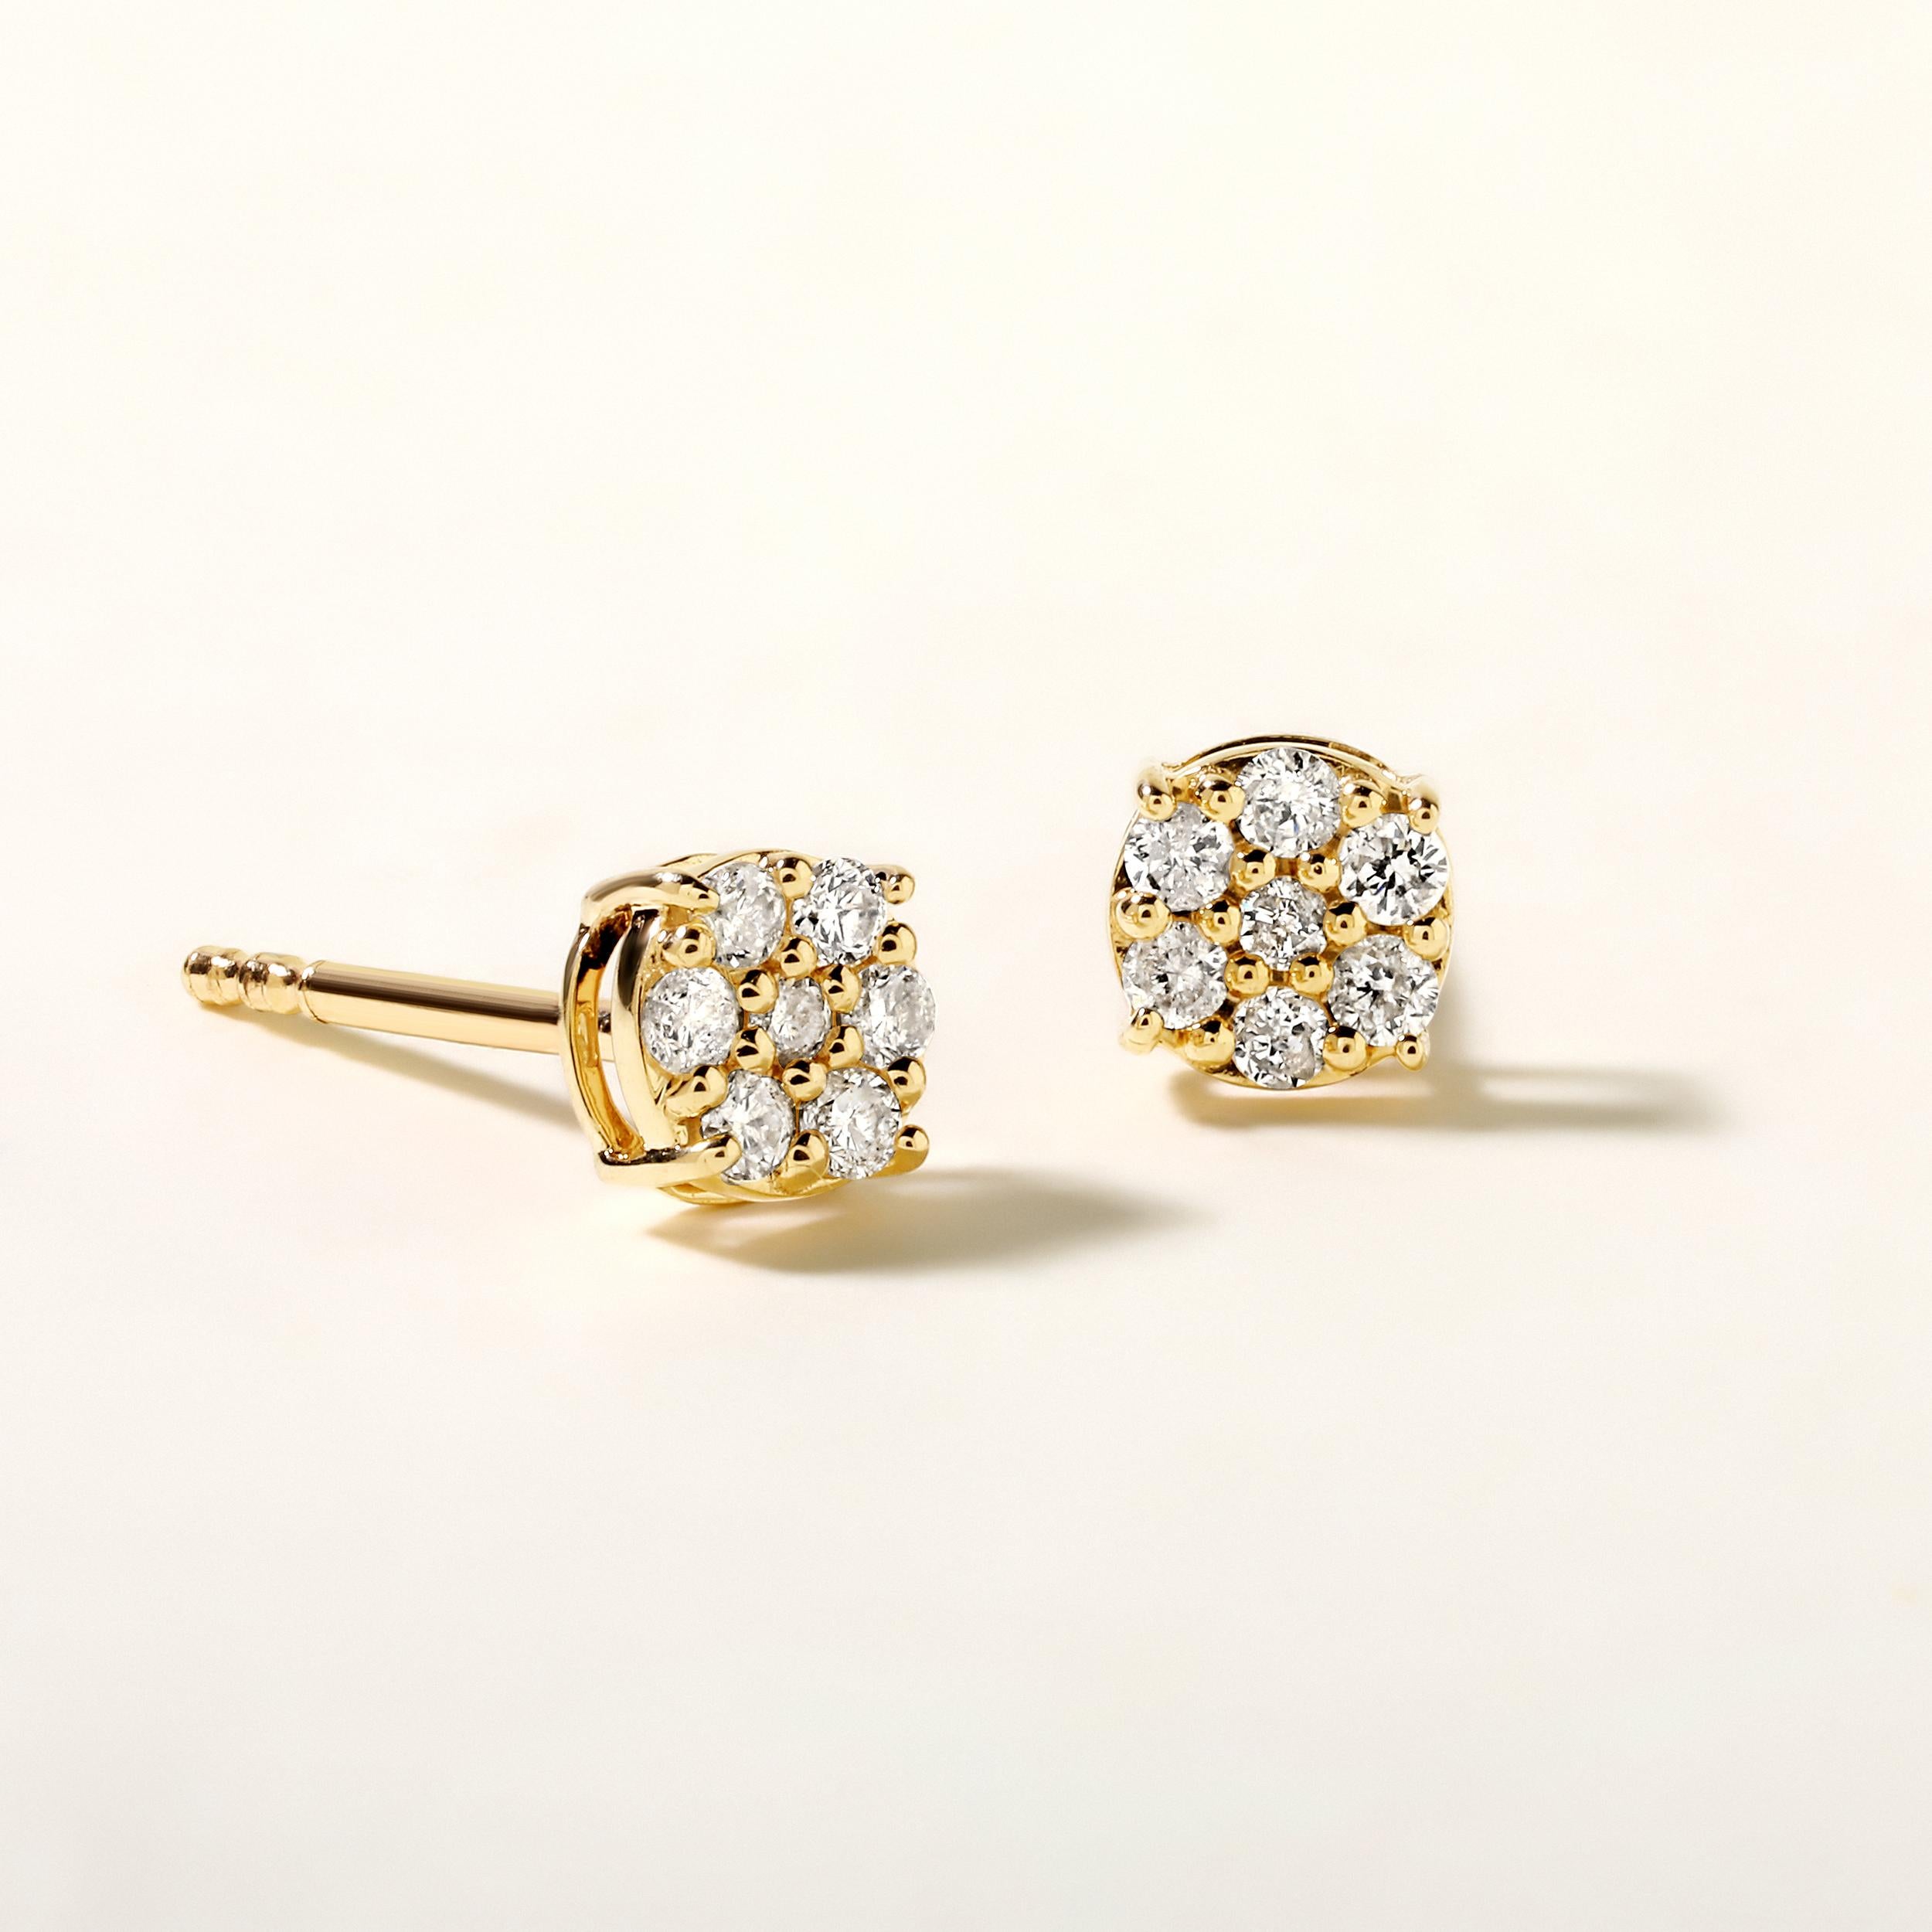 Crafted in 0.87 grams of 14K Yellow Gold, the earrings contains 14 stones of Round Diamonds with a total of 0.18 carat in F-G color and I1-I2 clarity.

CONTEMPORARY AND TIMELESS ESSENCE: Crafted in 14-karat/18-karat with 100% natural diamond and